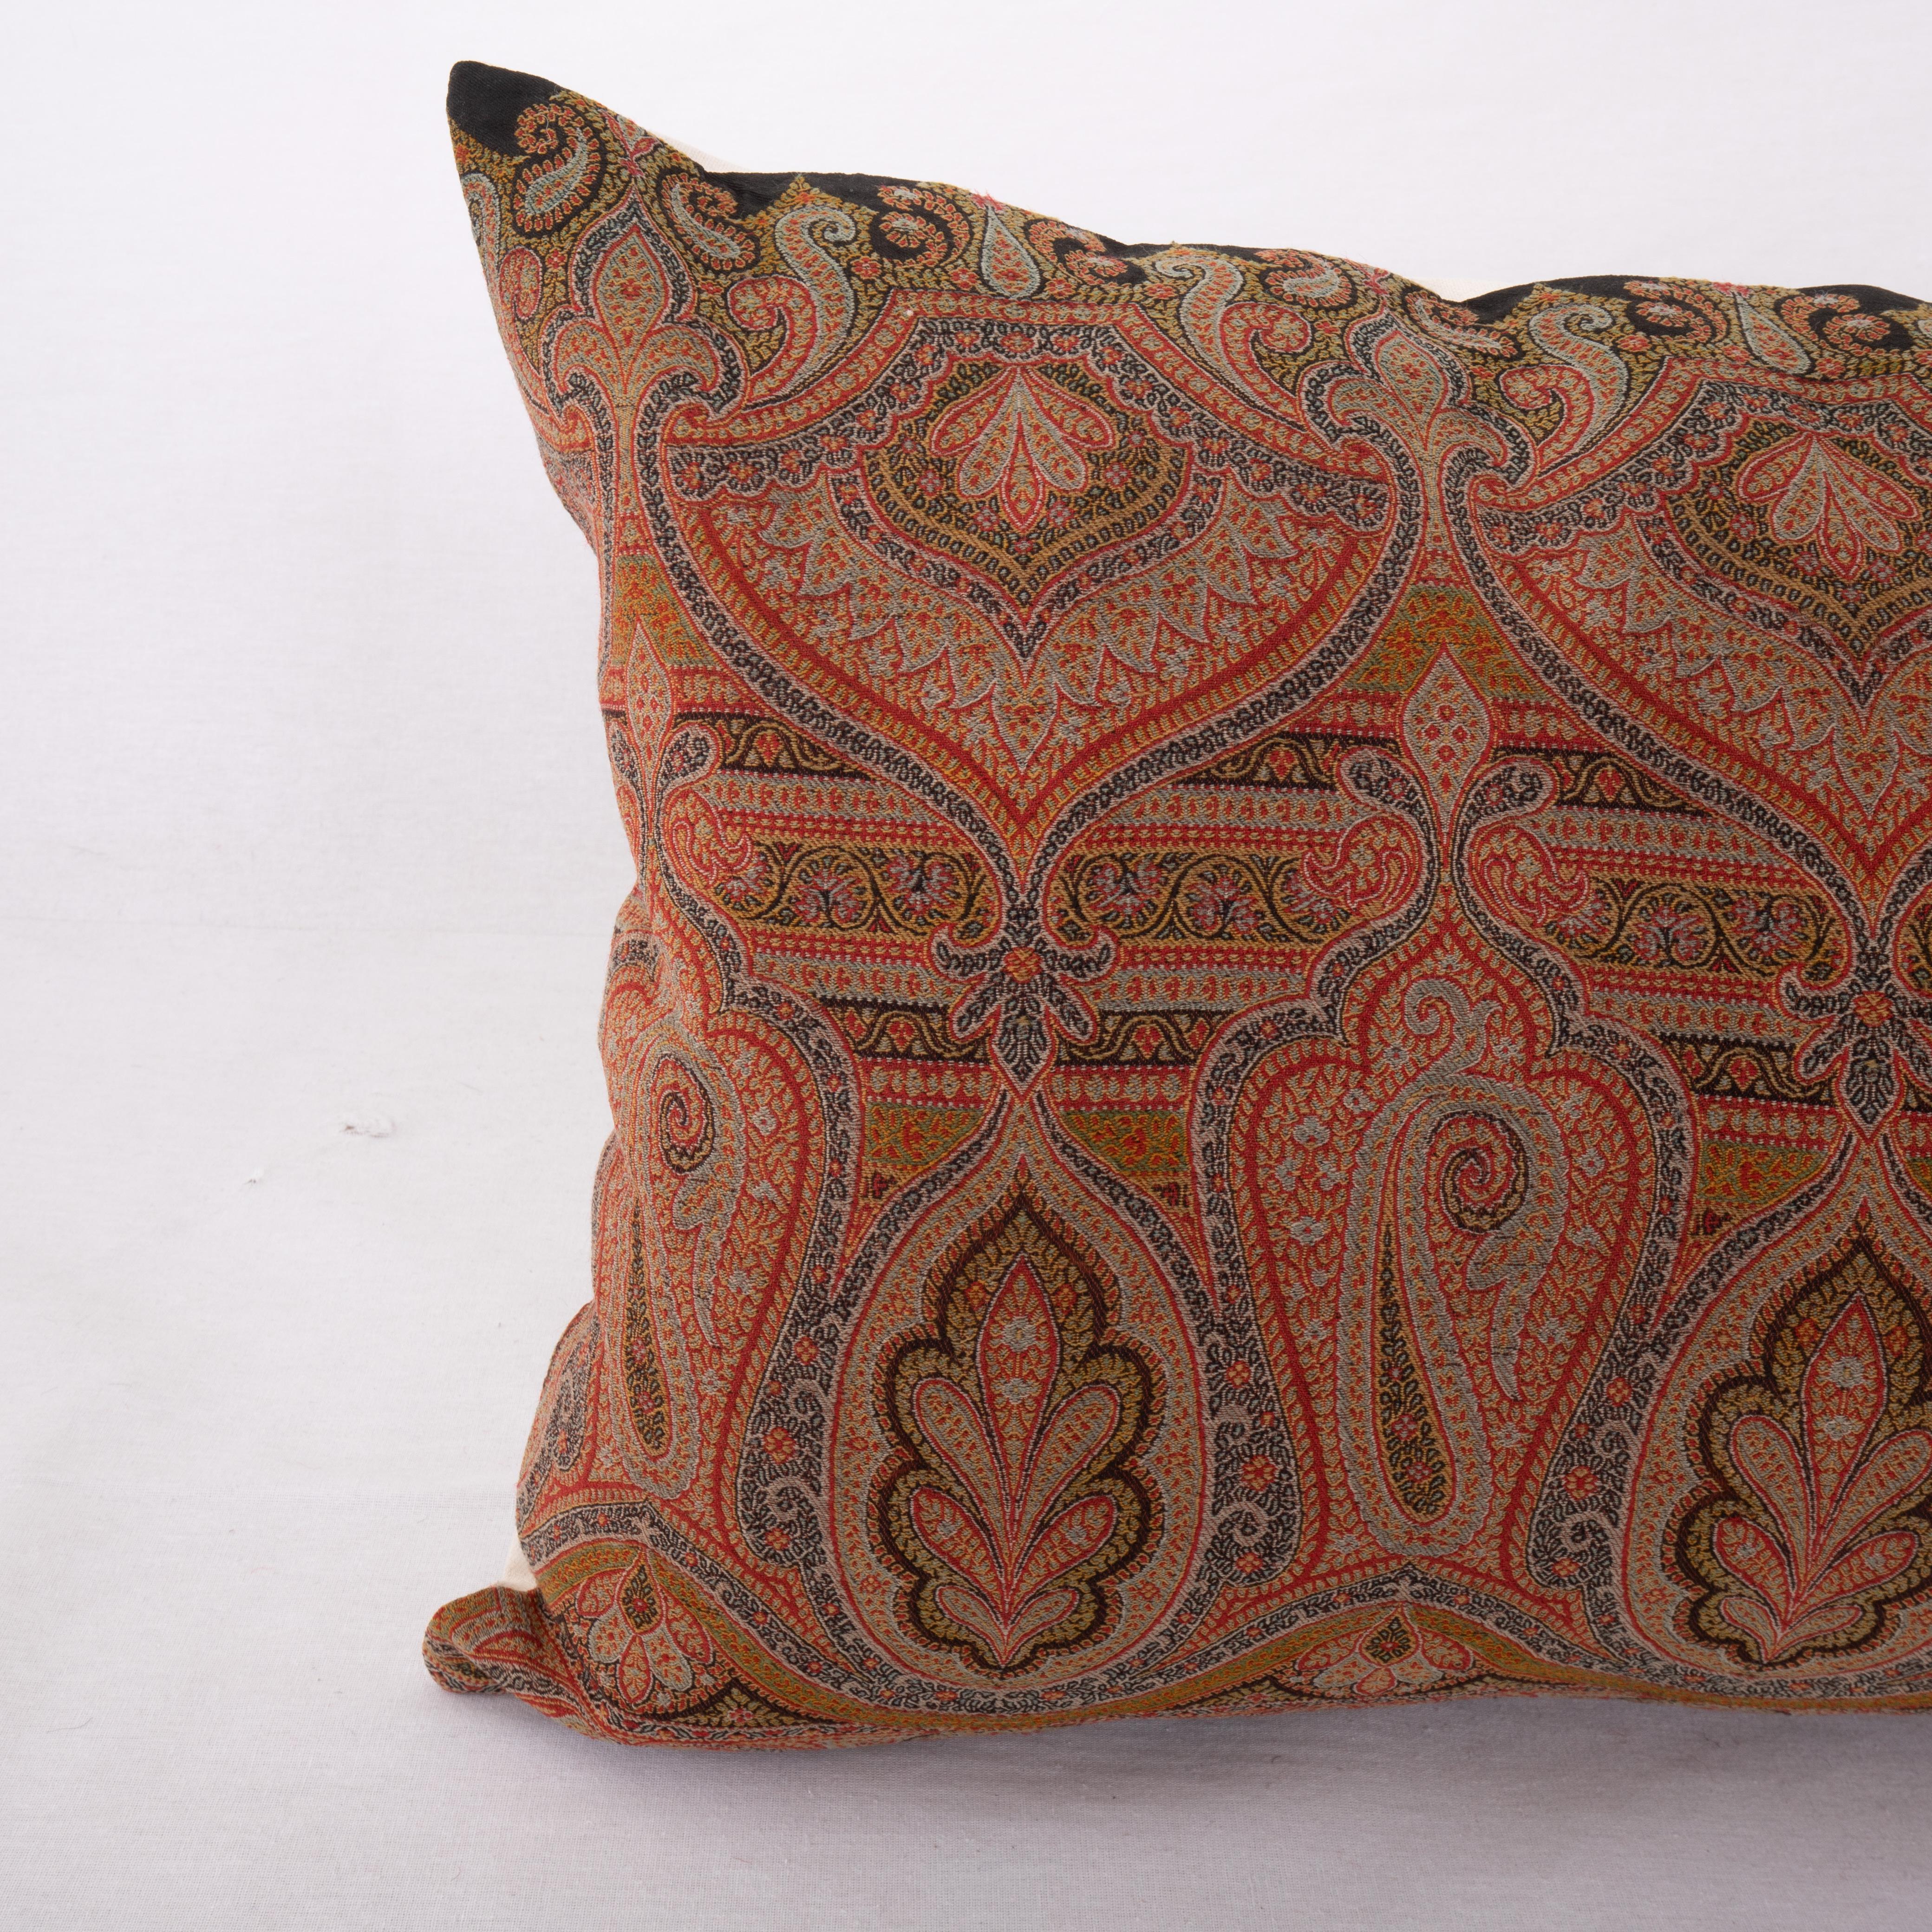 French Antique Pillow Cover Made from a European Wool Paisley Shawl, L 19th/ E.20th